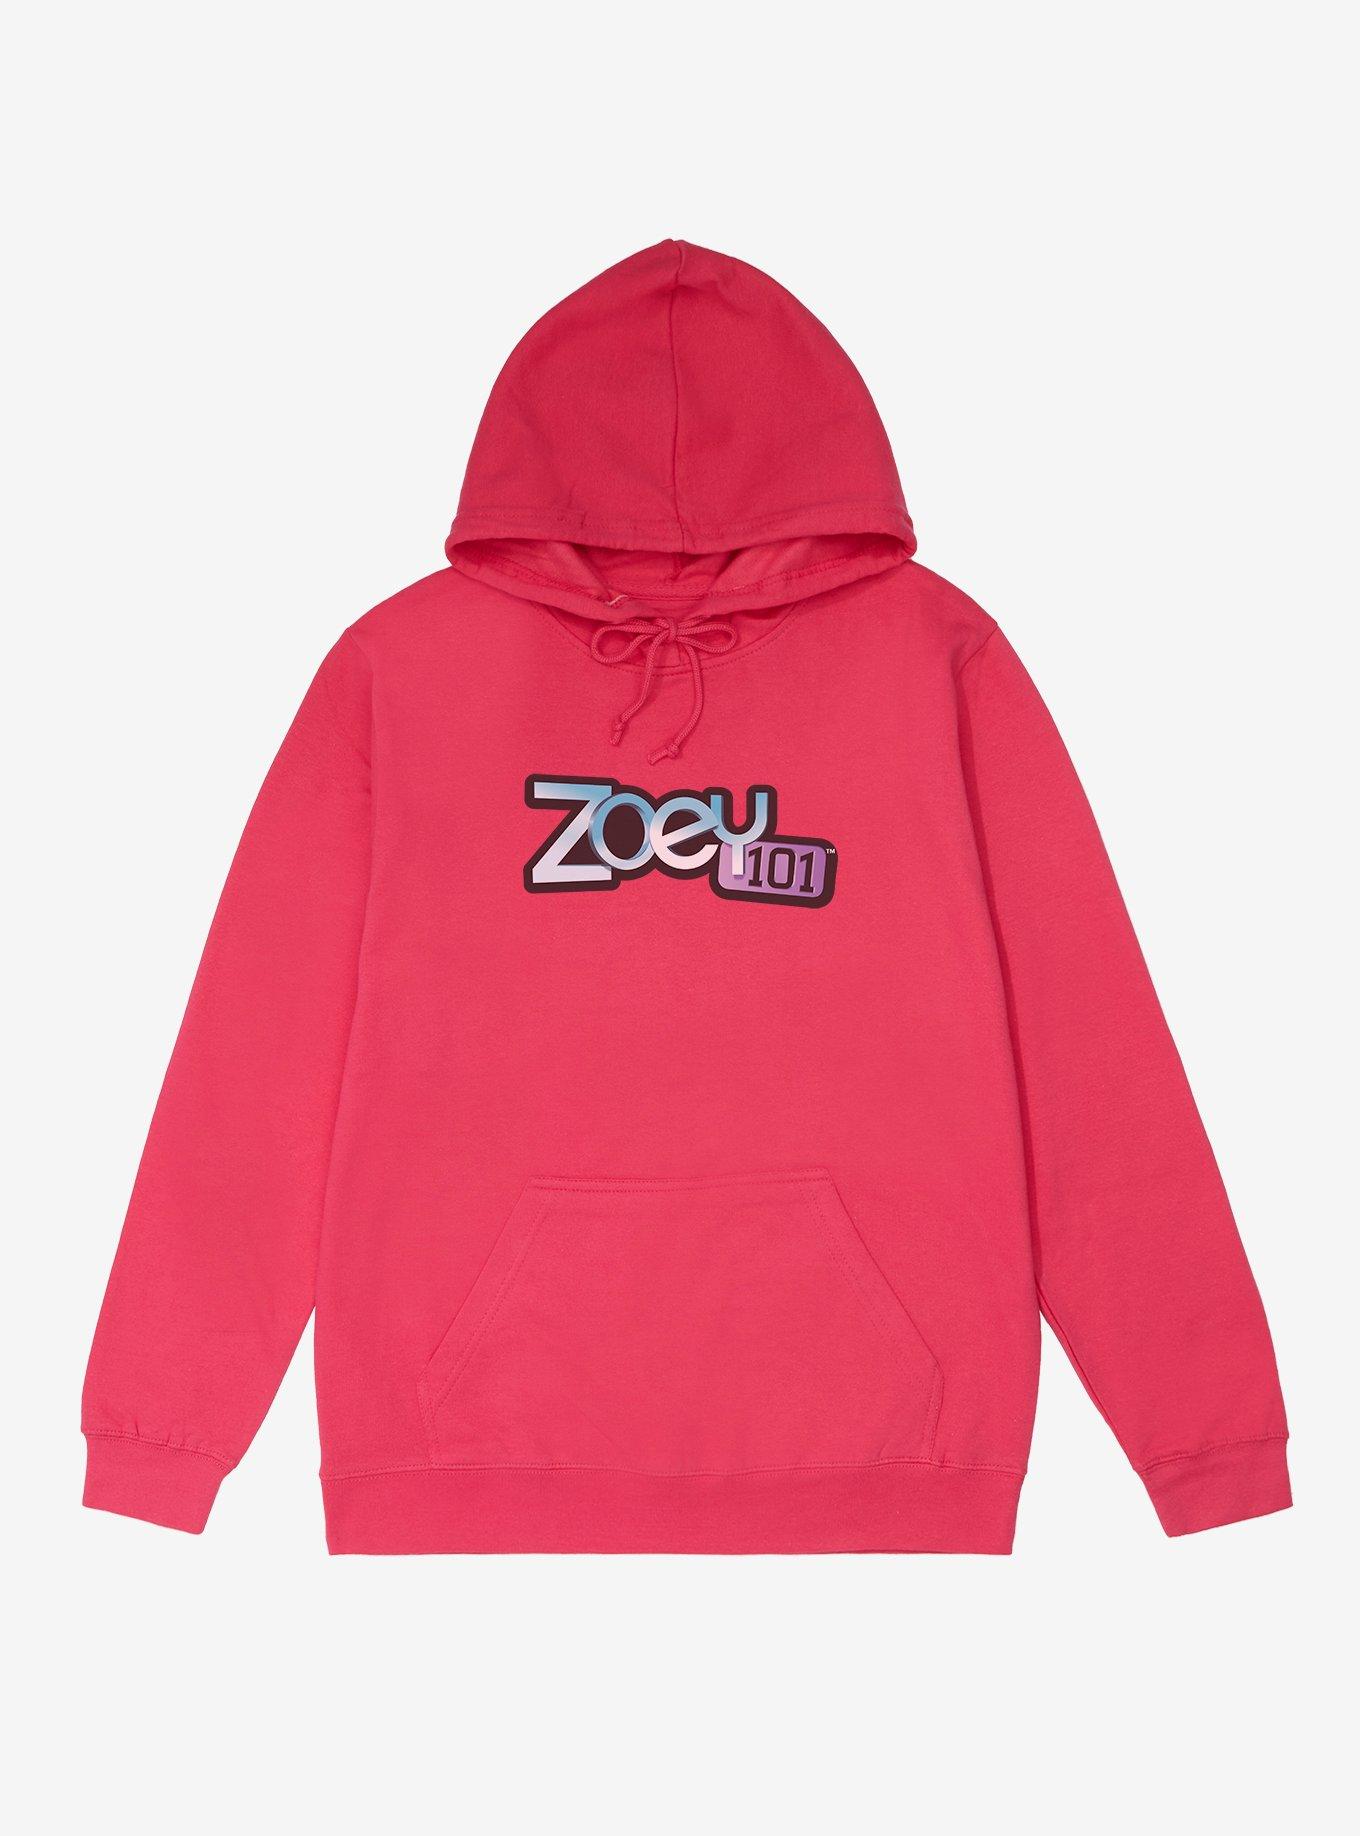 Zoey 101 Logo French Terry Hoodie